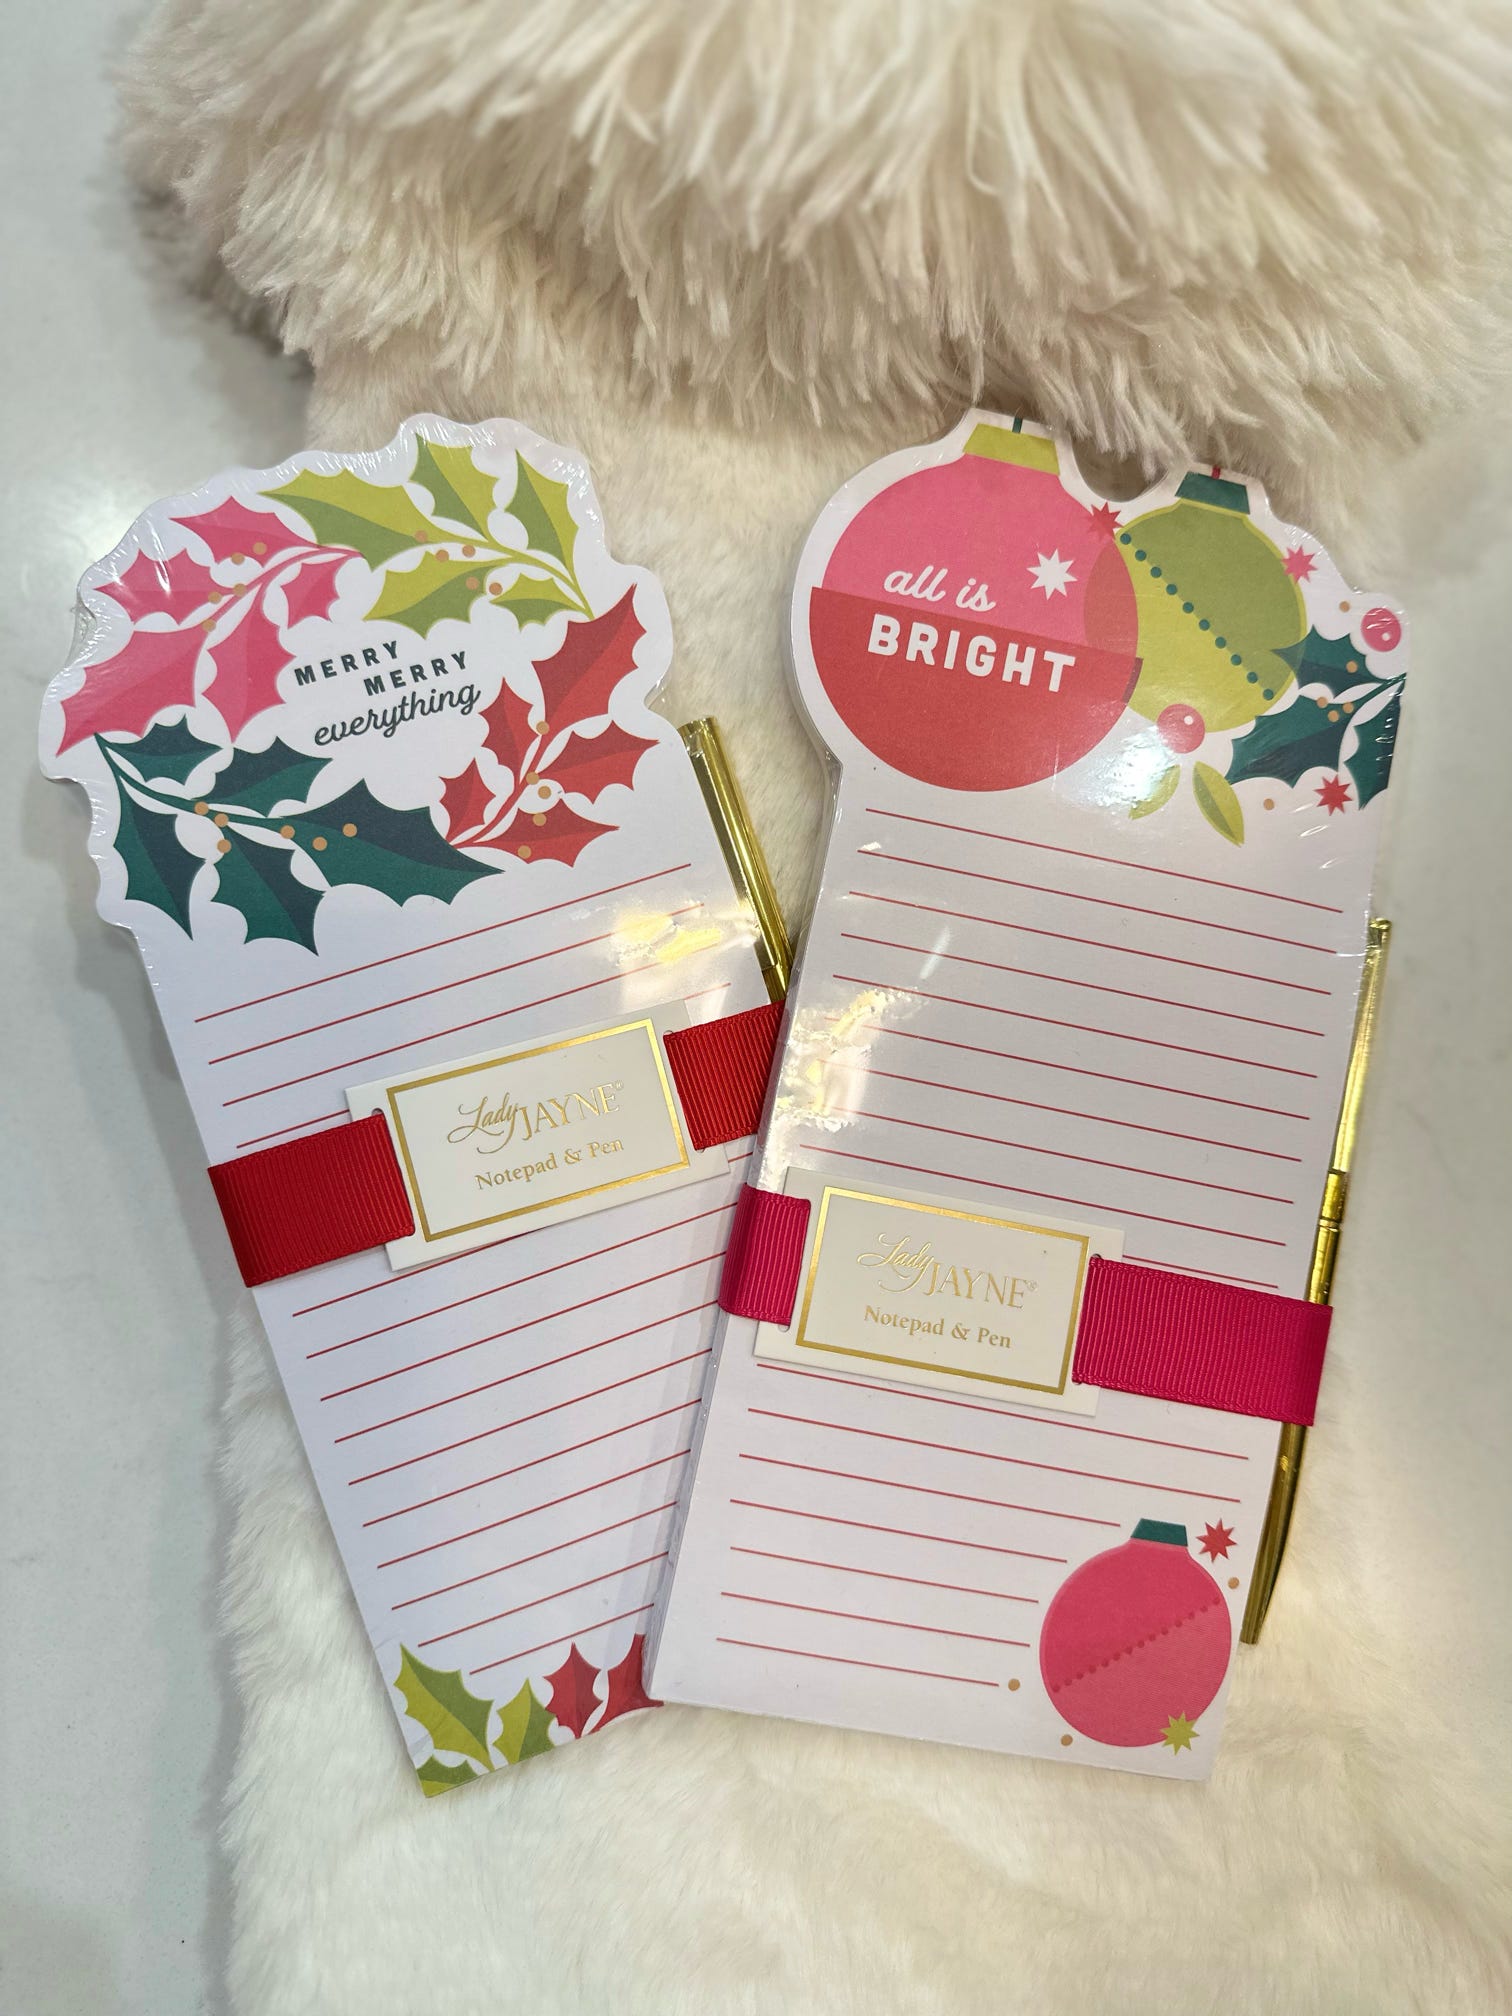 Holiday Note Pad & Pen - Final Sale